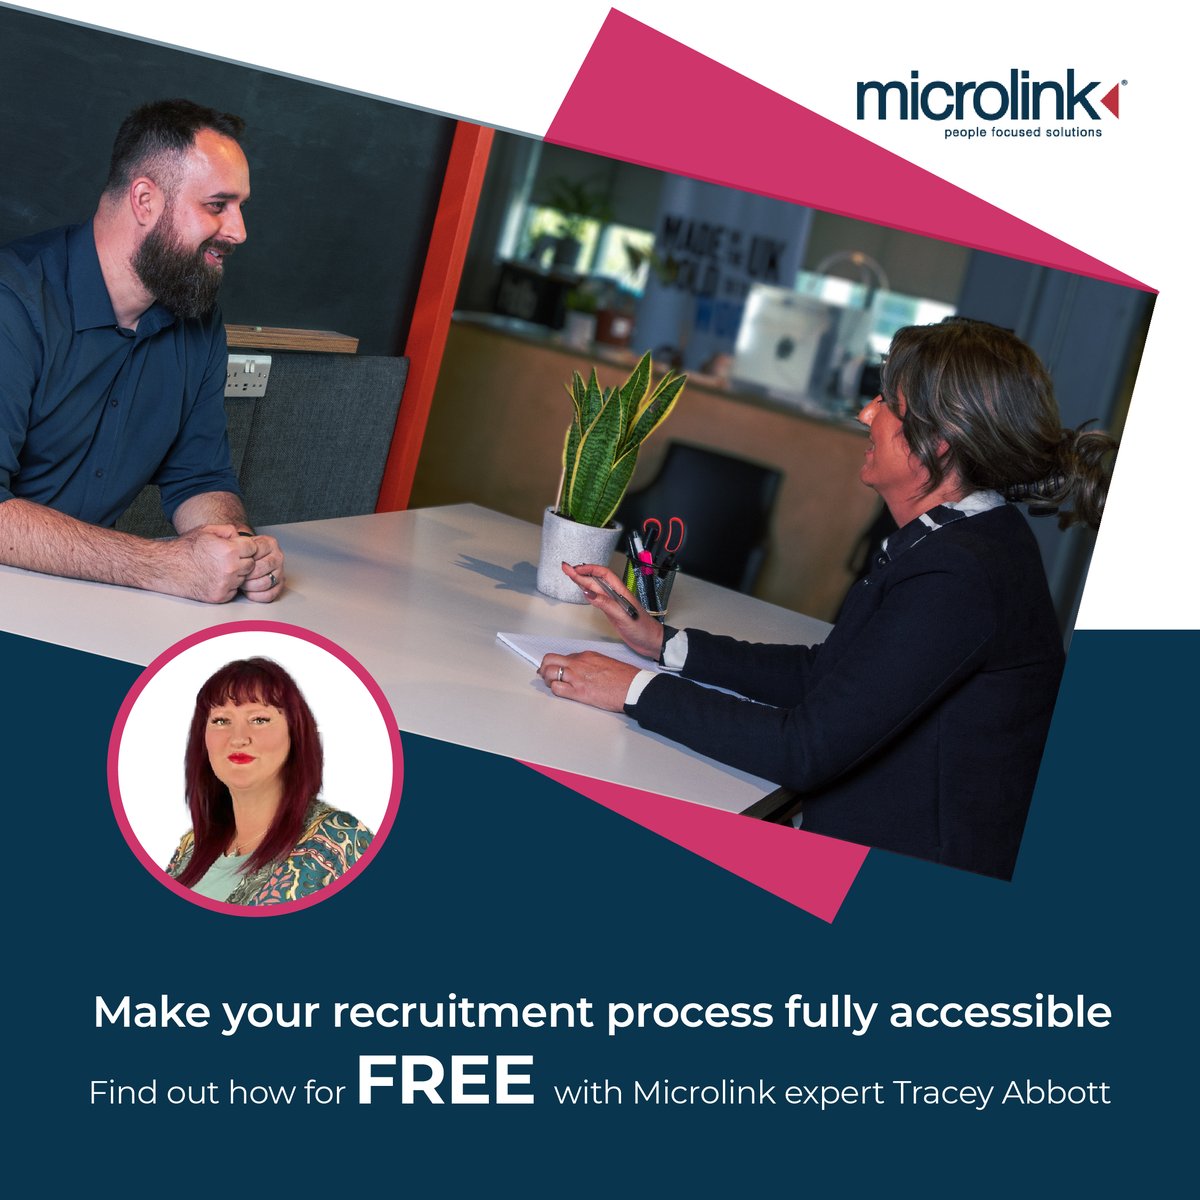 Create an #InclusiveRecruitment process with our FREE sessions! 
Don't miss this limited-time offer valued at £300. Get expert insights from Microlink's Access Consultant, Tracey Abbott, who will identify potential #accessibility pain points.

shorturl.at/cdpH8